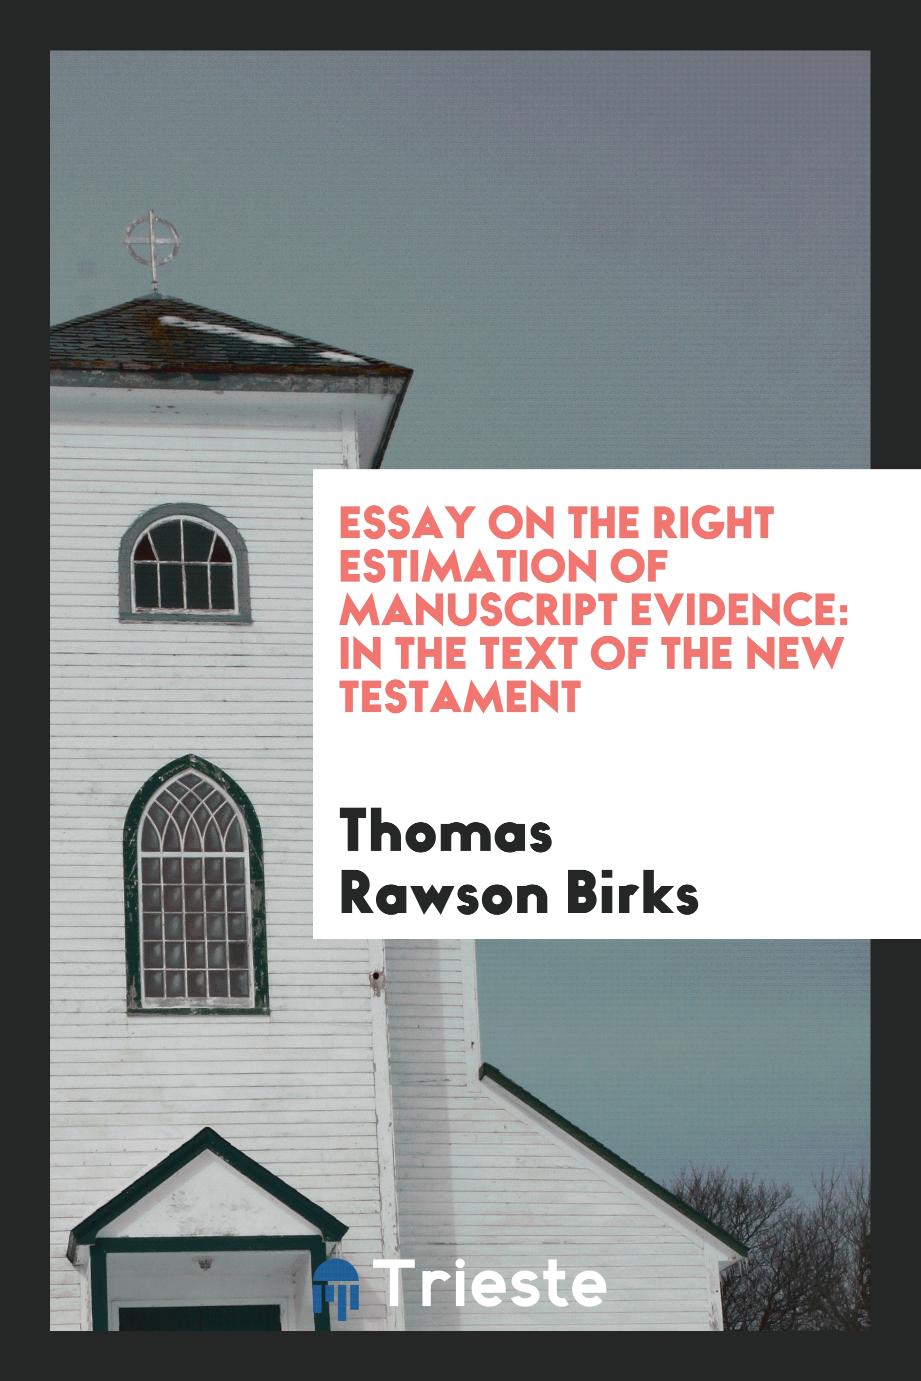 Essay on the Right Estimation of Manuscript Evidence: In the Text of the New Testament